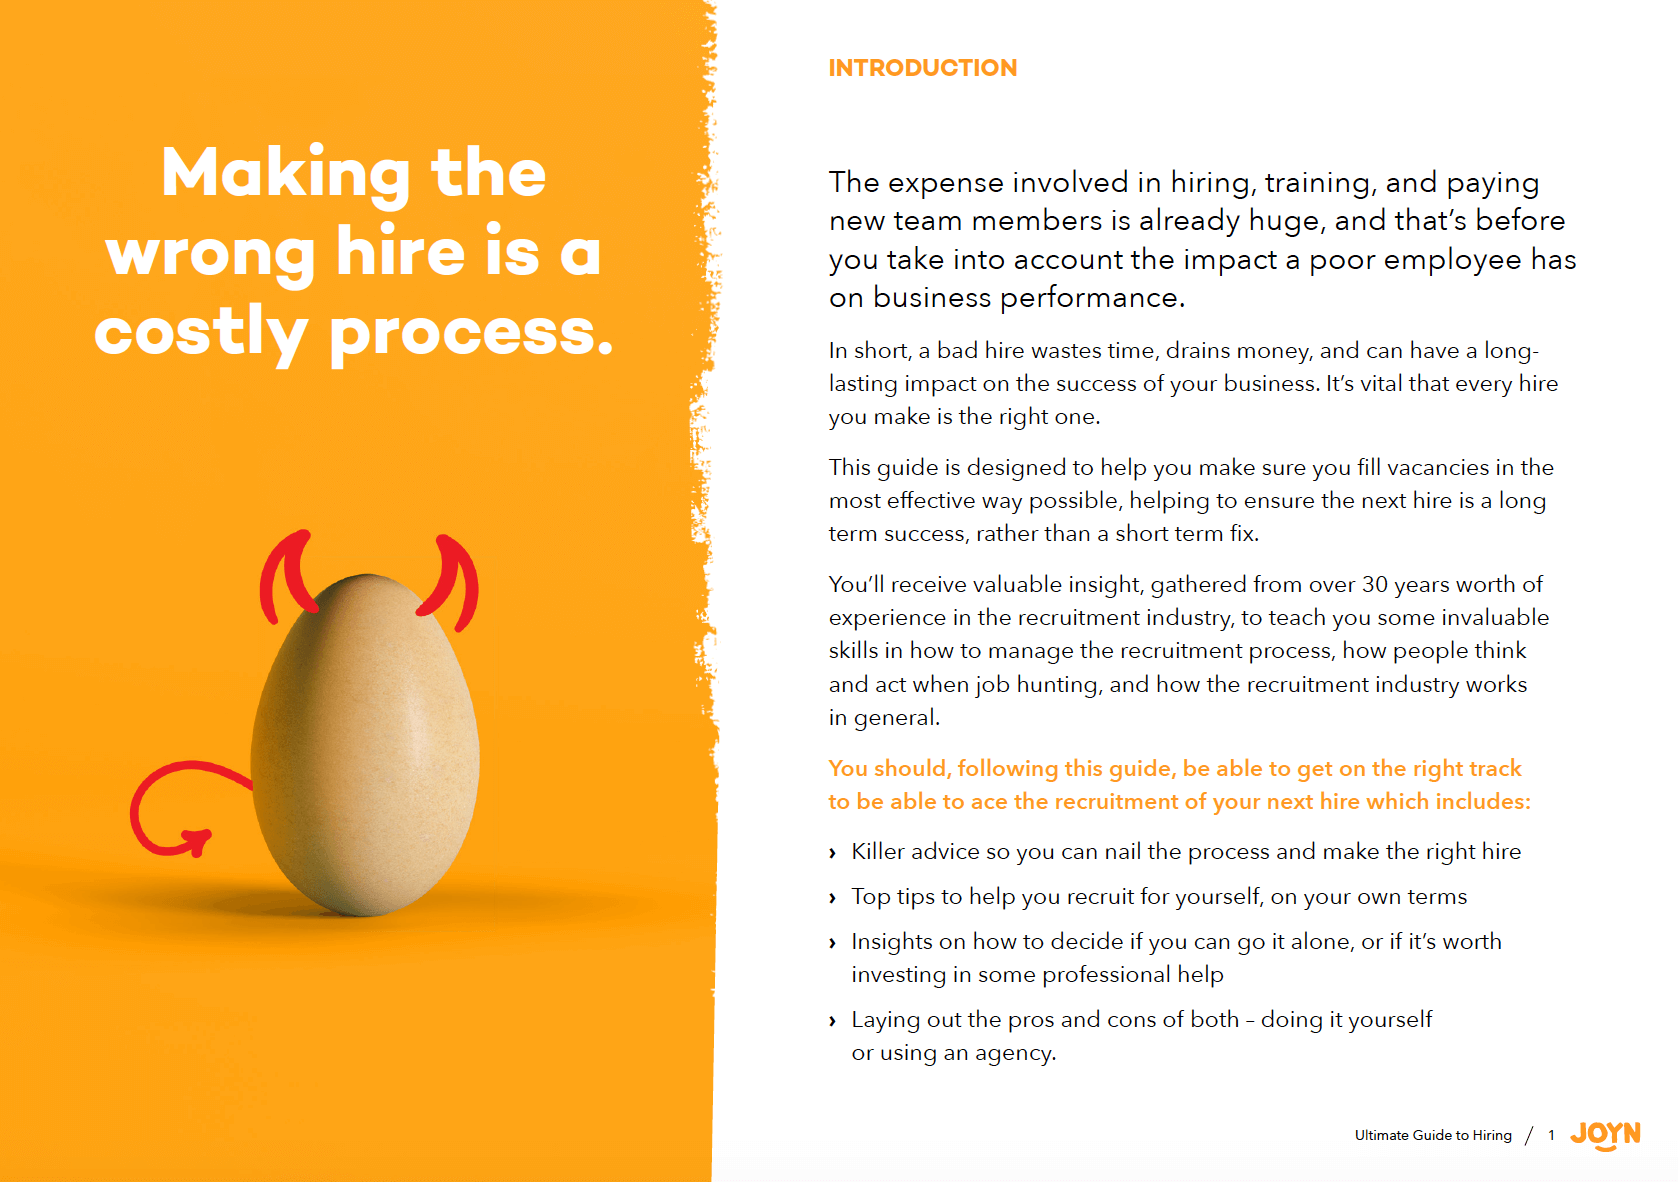 Ultimate-Guide-to-Hiring-2